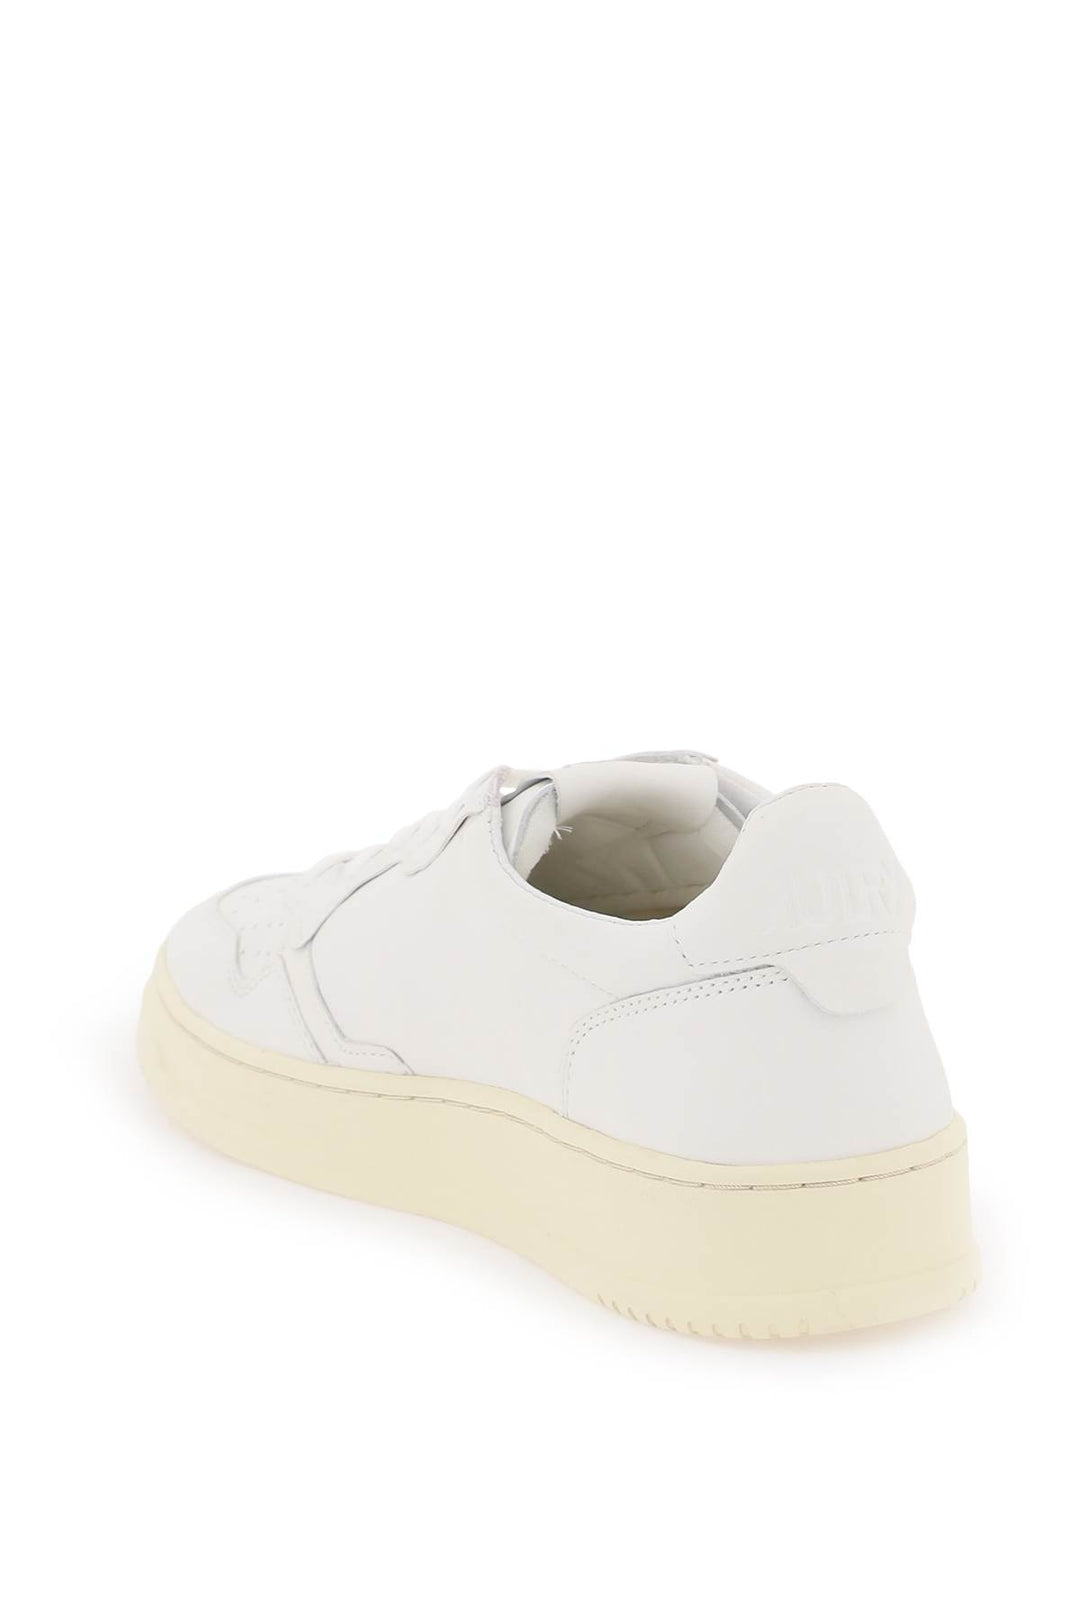 Autry Medalist Low Sneakers   Bianco